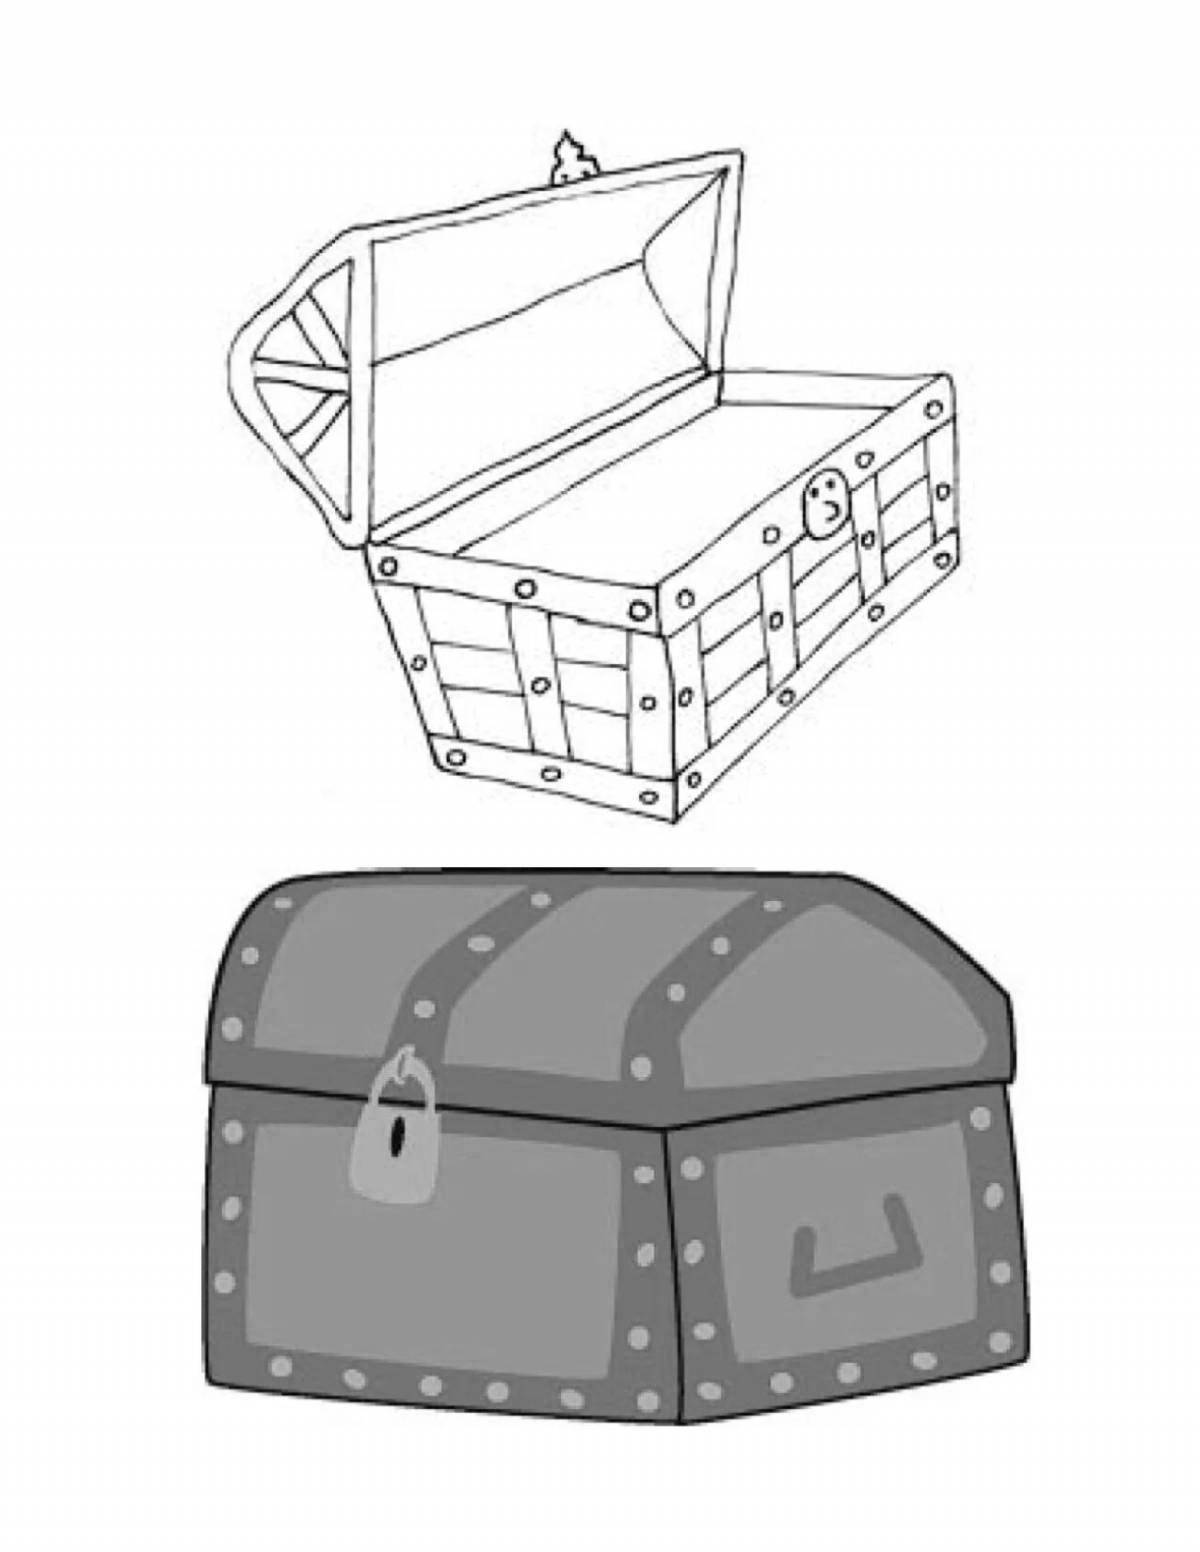 Great minecraft chest coloring page